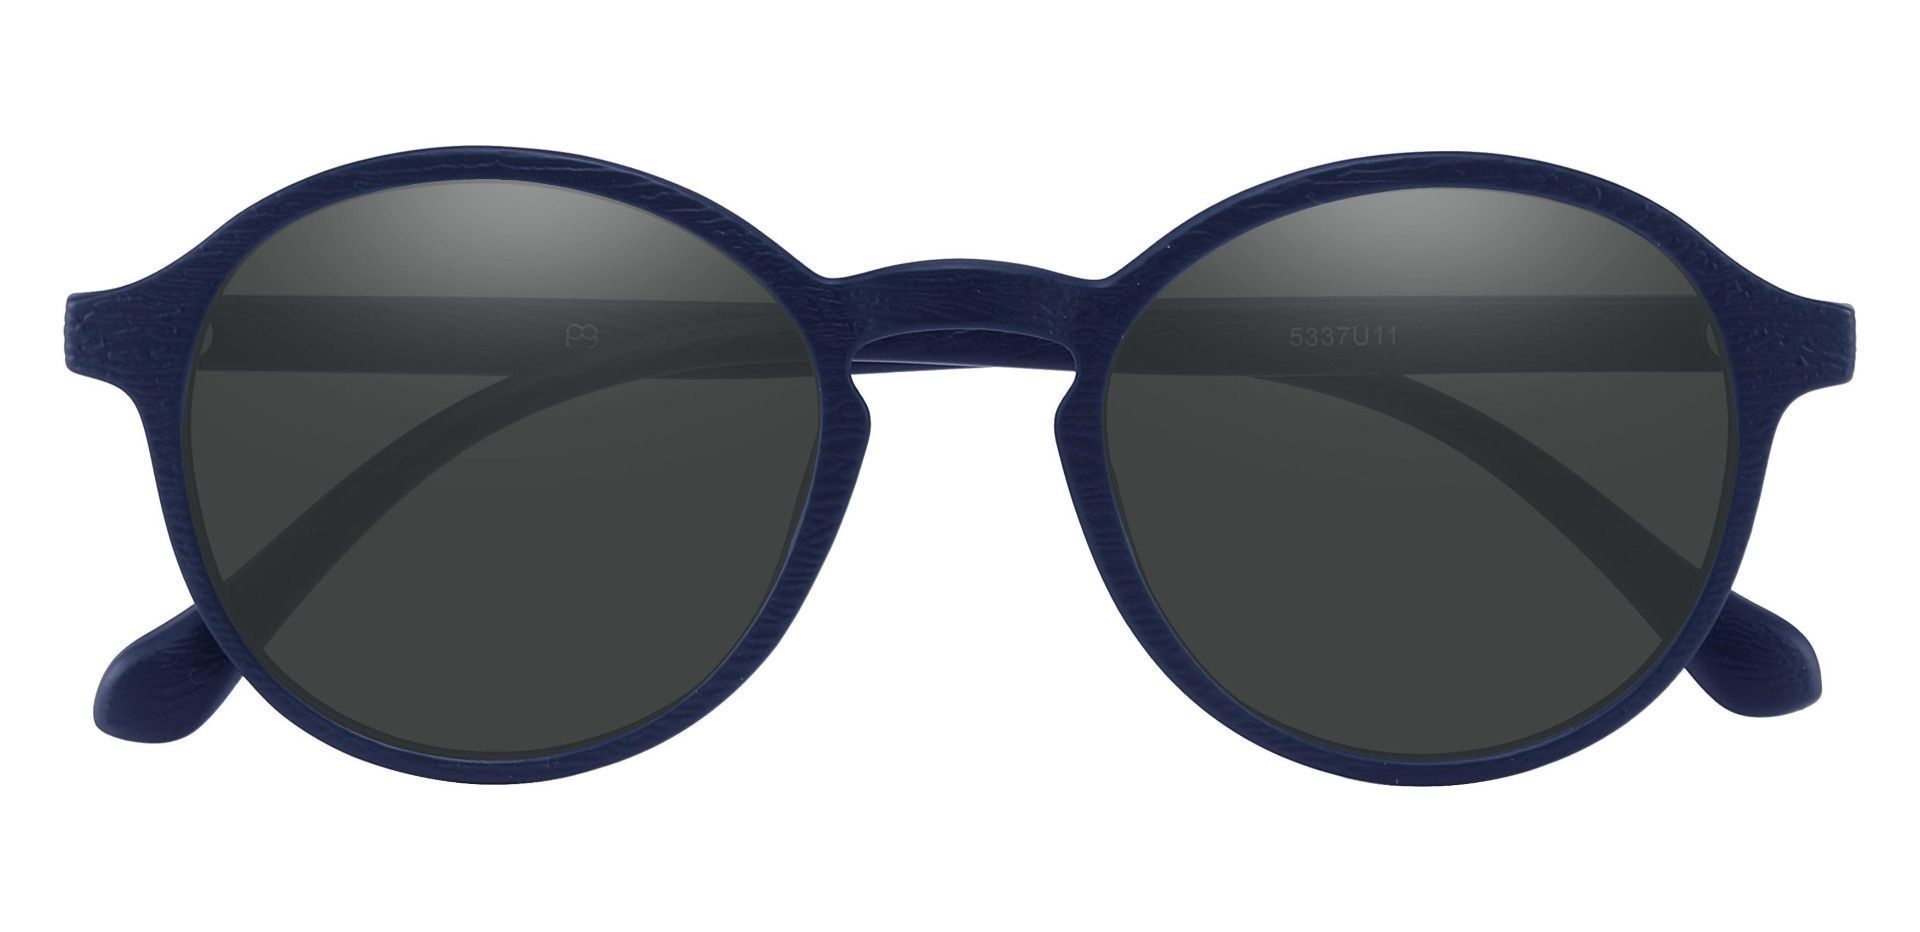 Whitney Round Lined Bifocal Sunglasses - Blue Frame With Gray Lenses